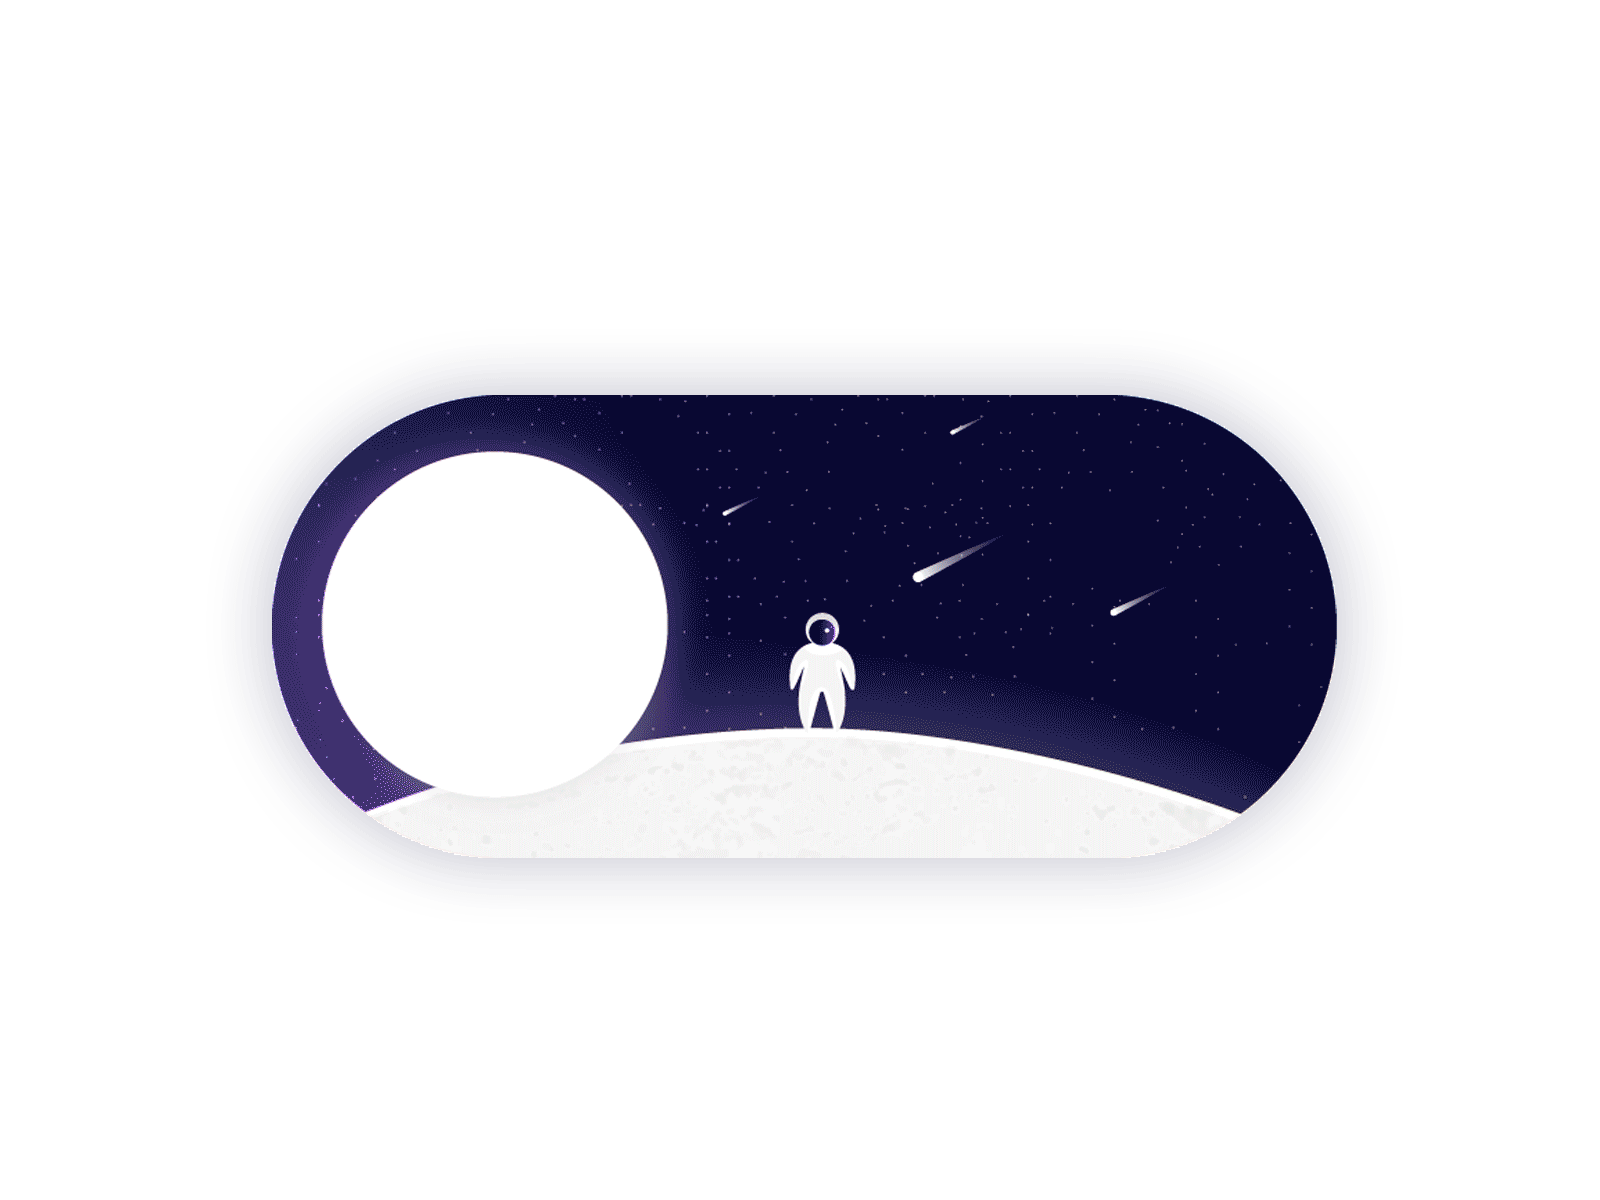 Day/Night Toggle Button animation animation button animation button design design designs designthursday dribbble flat graphic design illustration minimal moon nmwdesigns sun toggle button toggle switch toggles ui